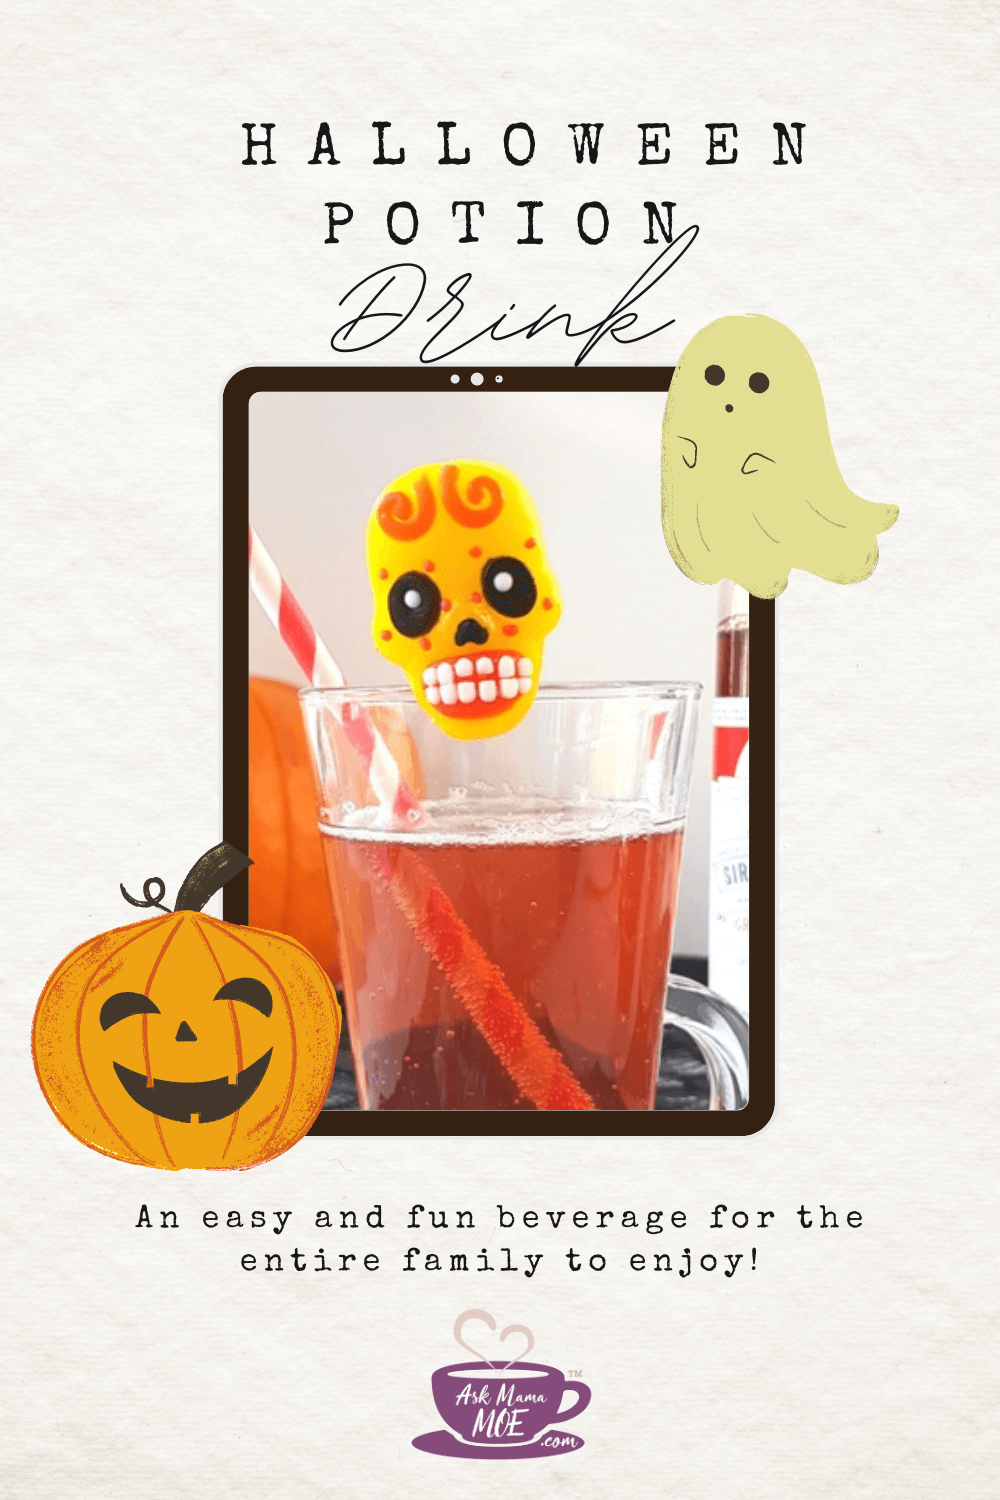 Looking for a delicious way to celebrate Halloween? Check out this easy-peasy recipe for a Halloween Potion drink. It’s full of flavor and your family will love how creepy it looks!